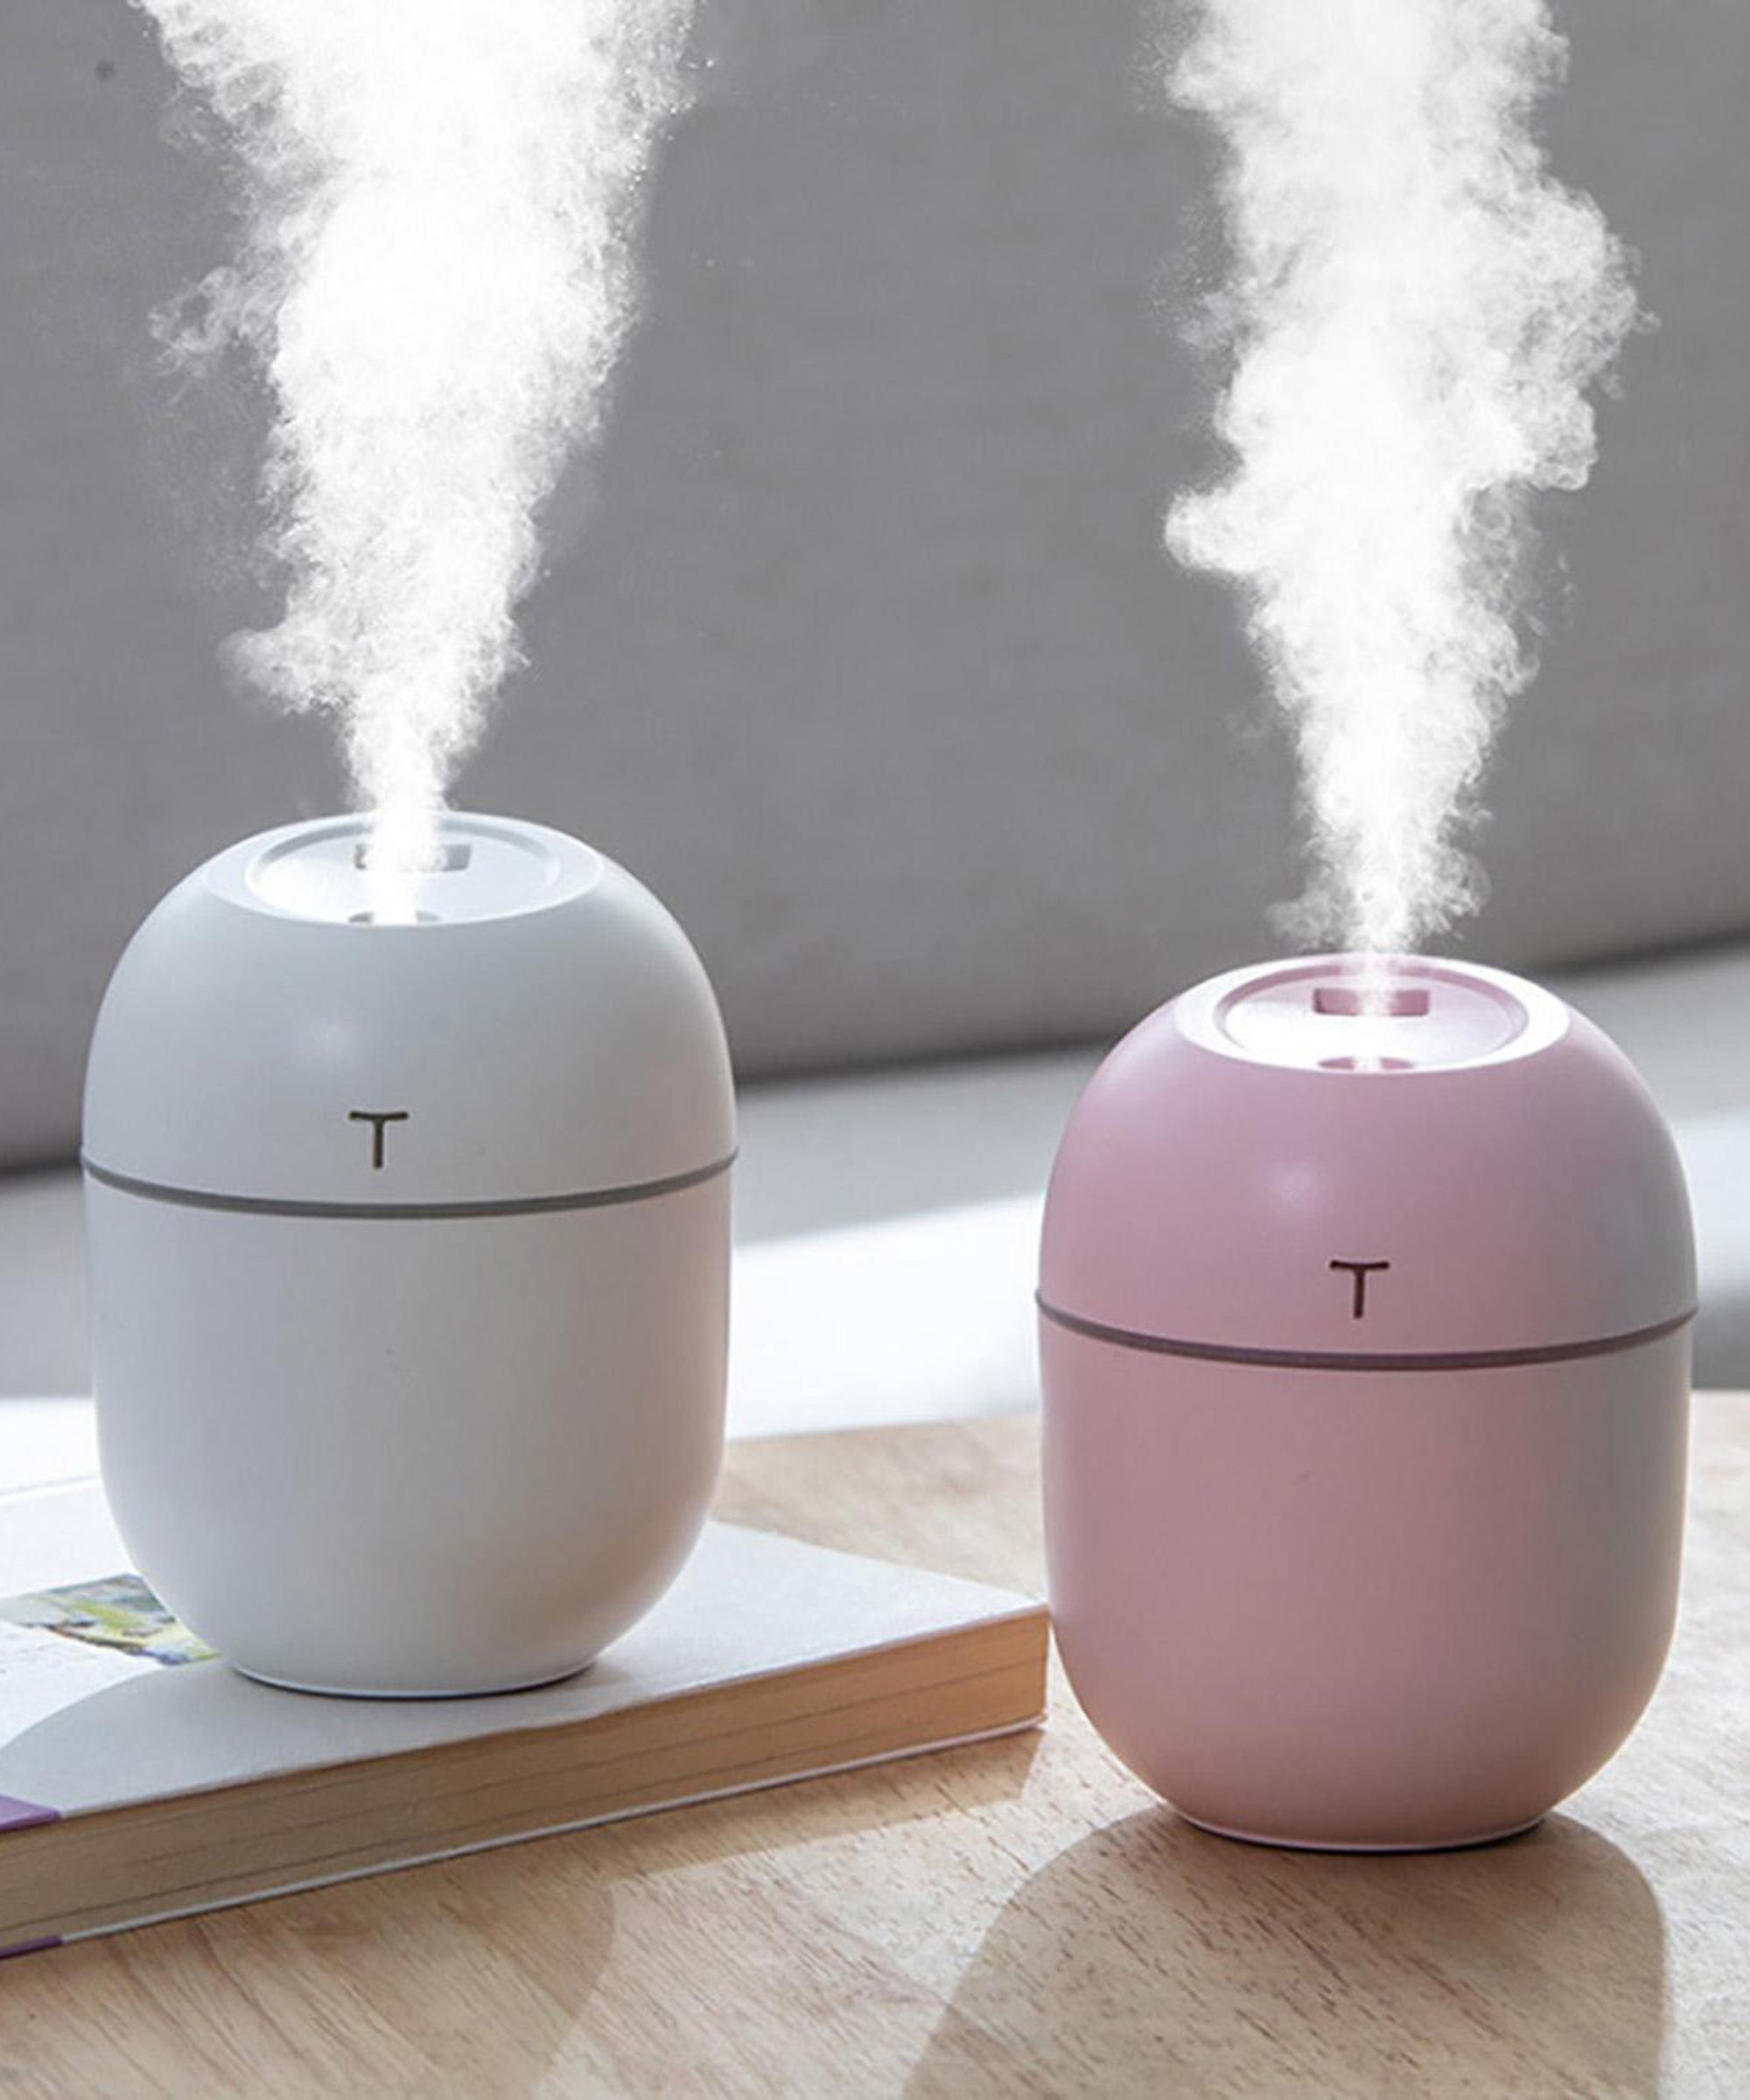 Sugely Mini Humidifier Cool Mist USB Personal Small Humidifier Cute Desk Vaporizer Humidifier,Panda Humidifier Essential Oil Diffuser Aroma Essential Oil Humidifier 